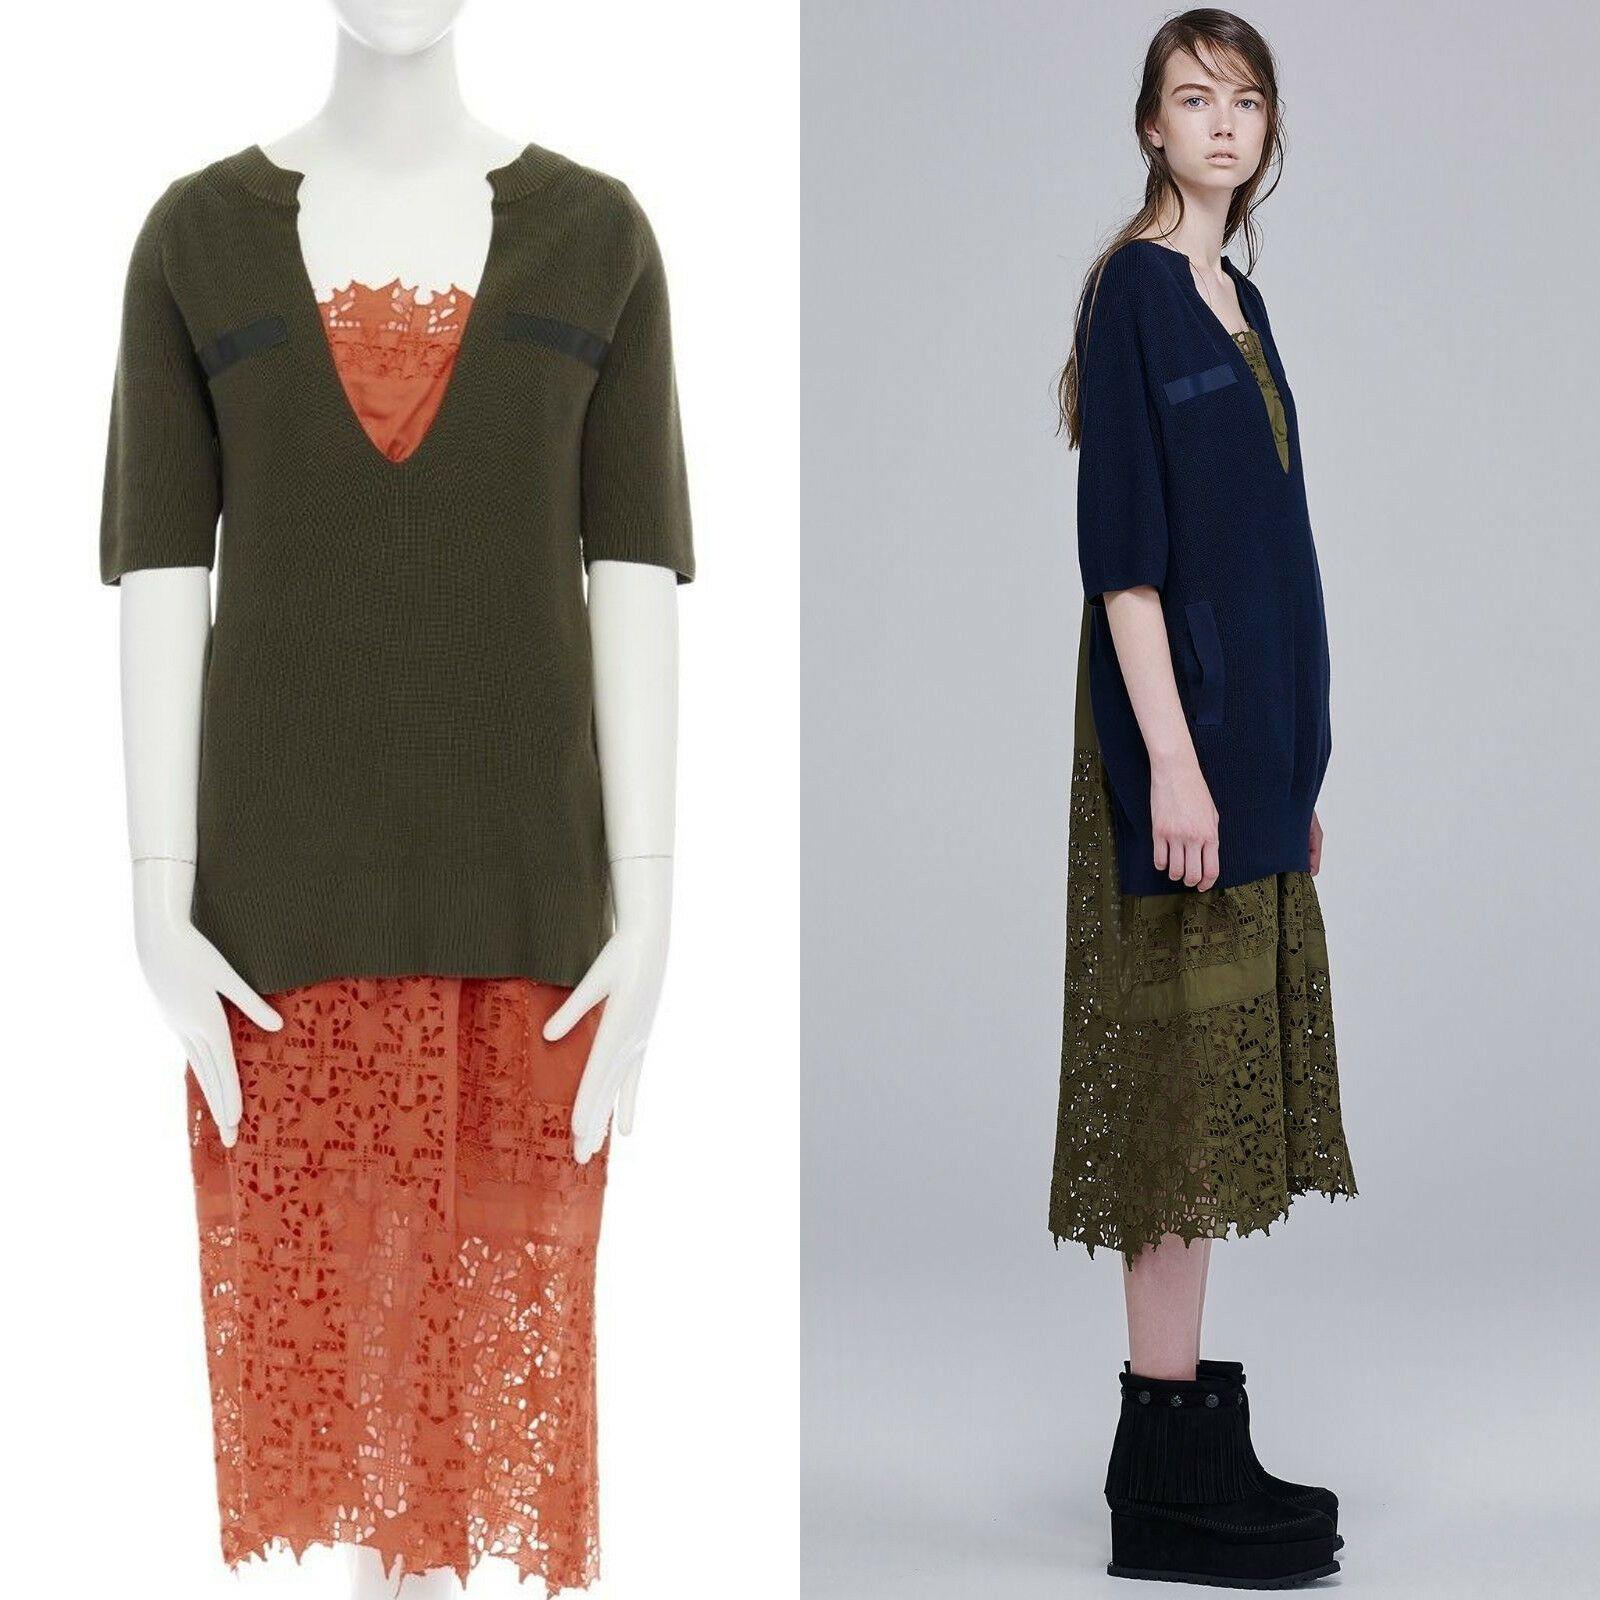 new SACAI Resort 16 military green sweater top orange star lace dress set JP2 M
SACAI BY CHITOSE ABE
FROM THE RESORT 2016 COLLECTION
COTTON, CUPRO. 
2-IN-1 DRESS SWEATER DRESS SET. 
CAN BE WORN SEPERATELY. 
EXCELLENT COMBINATION FOR